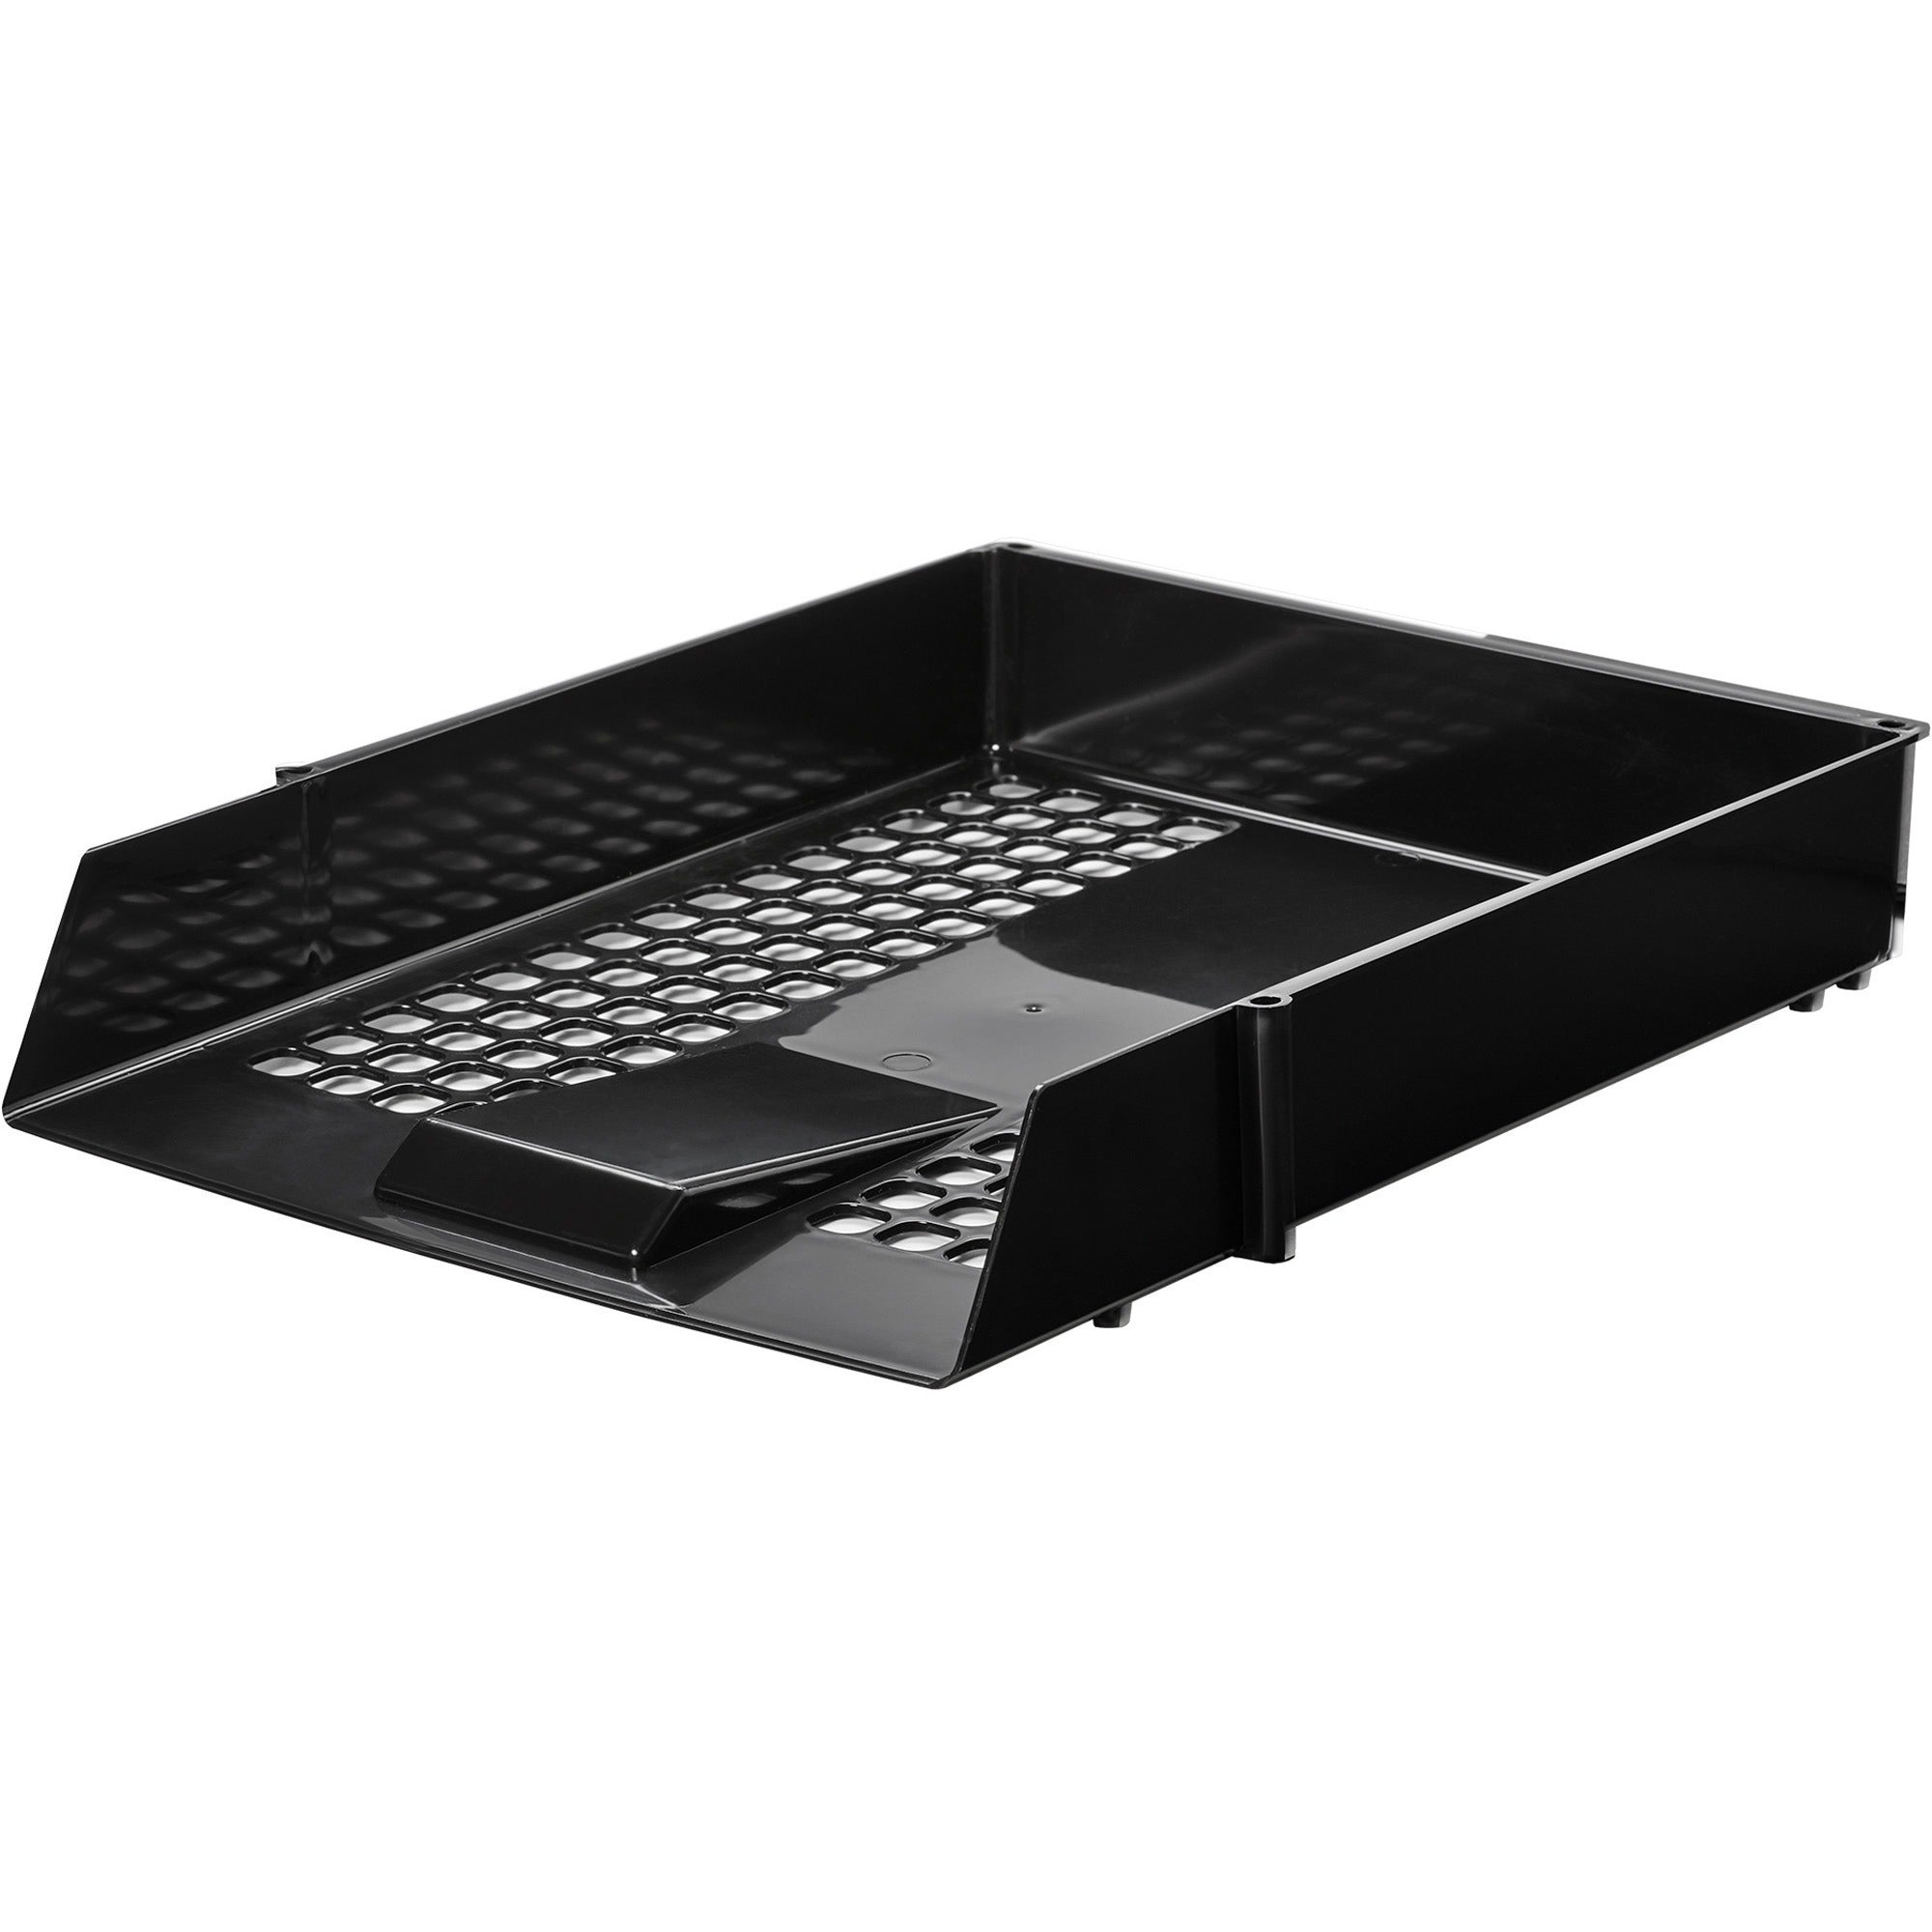 deflecto-antimicrobial-industrial-front-load-tray-24-height-x-108-width-x-138-depthdesktop-antimicrobial-lightweight-mildew-resistant-front-loading-black-polystyrene_def63905 - 3